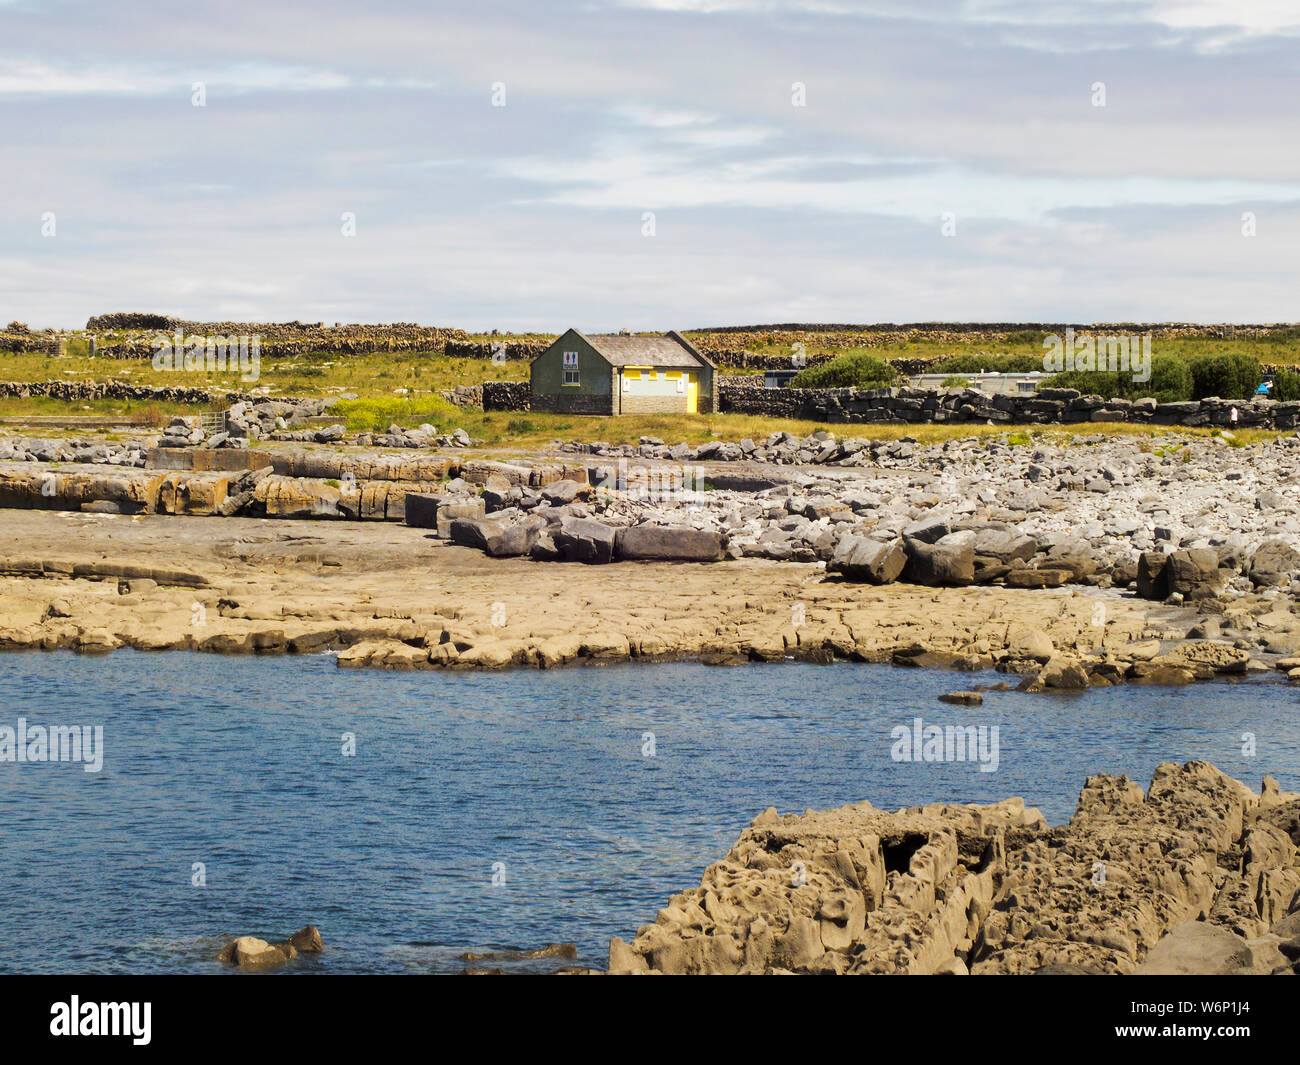 Image of a stony shore of Inis Oirr Island in Aran Islands Archipelago.West Atlantic Coast of Ireland in County Clare. Stock Photo